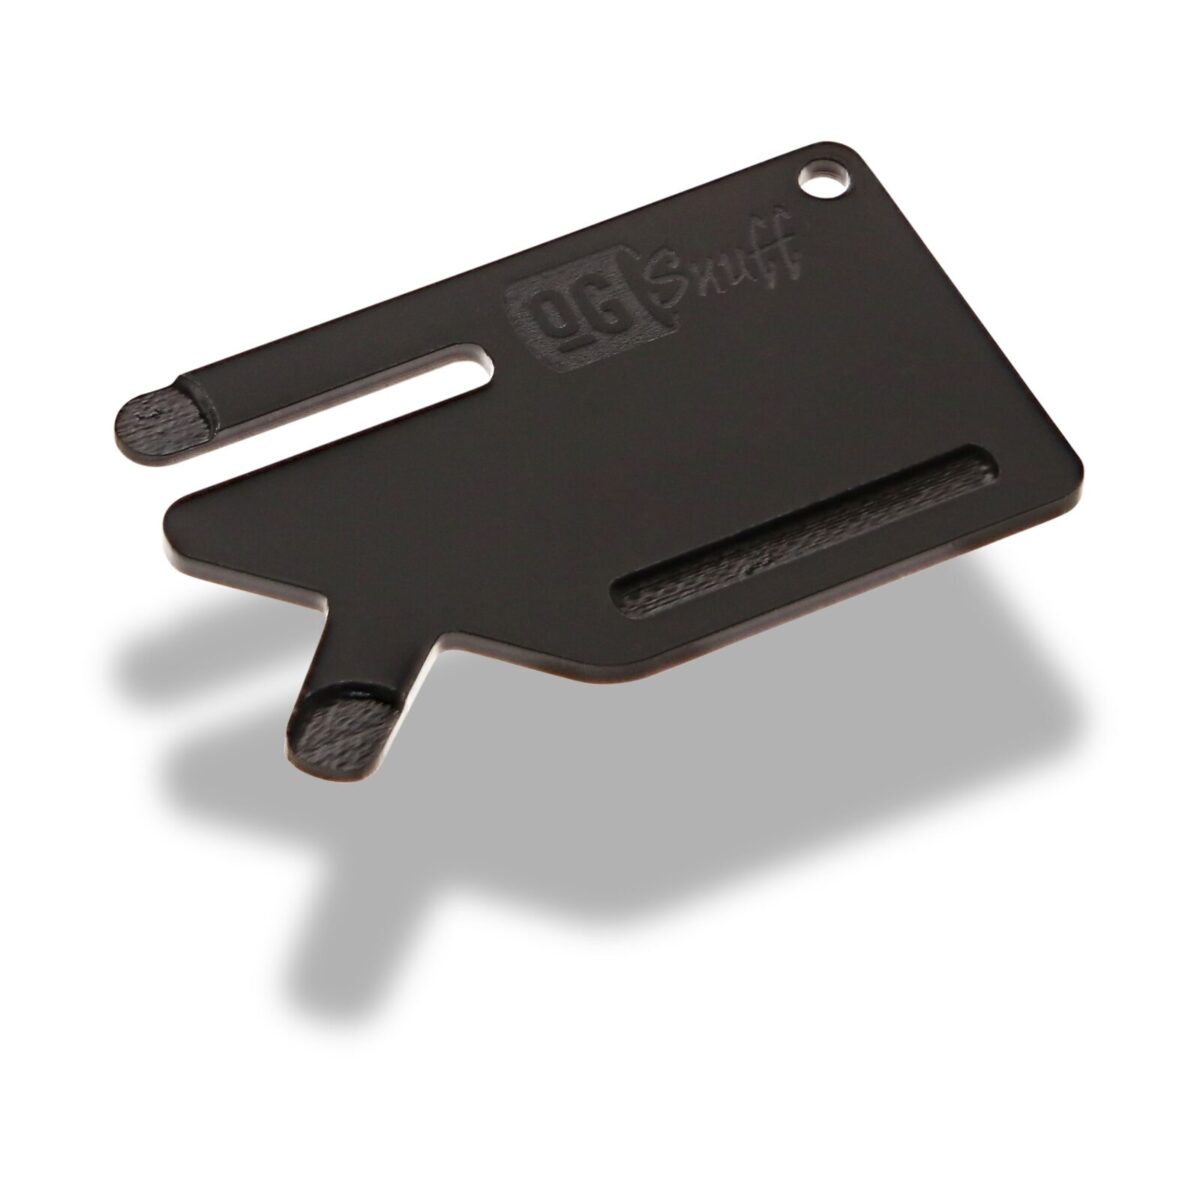 Matte Black Snuff Multitool Card by OGSnuff - Compact and Stylish Snuff Accessory